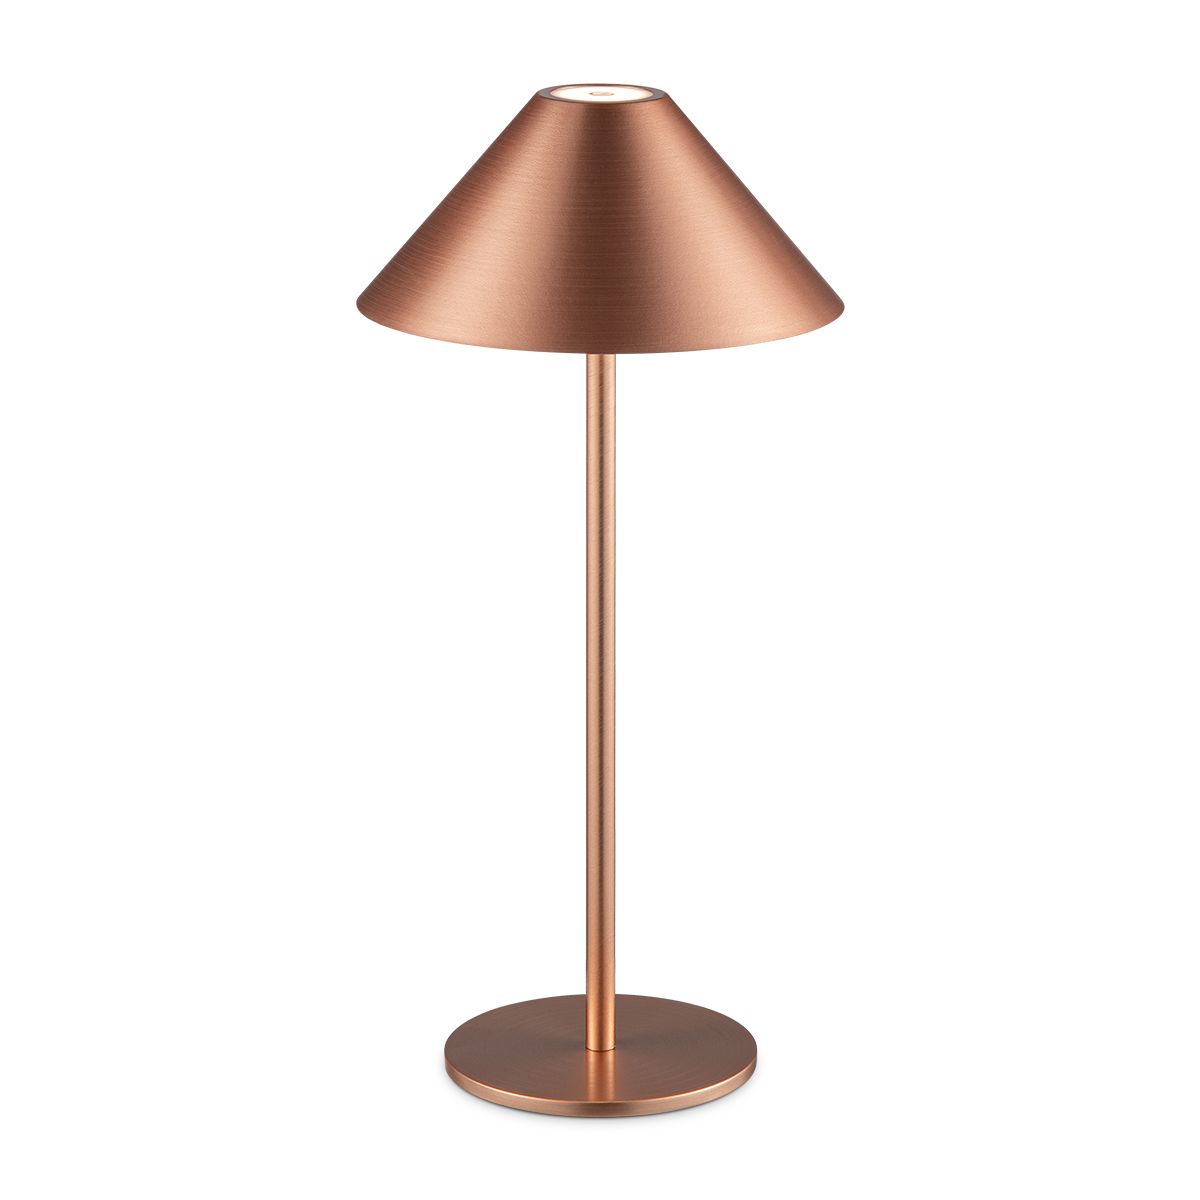 Tangla lighting - TLT7643-01CP - LED table lamp - rechargeable plastic and metal - copper - umbrella